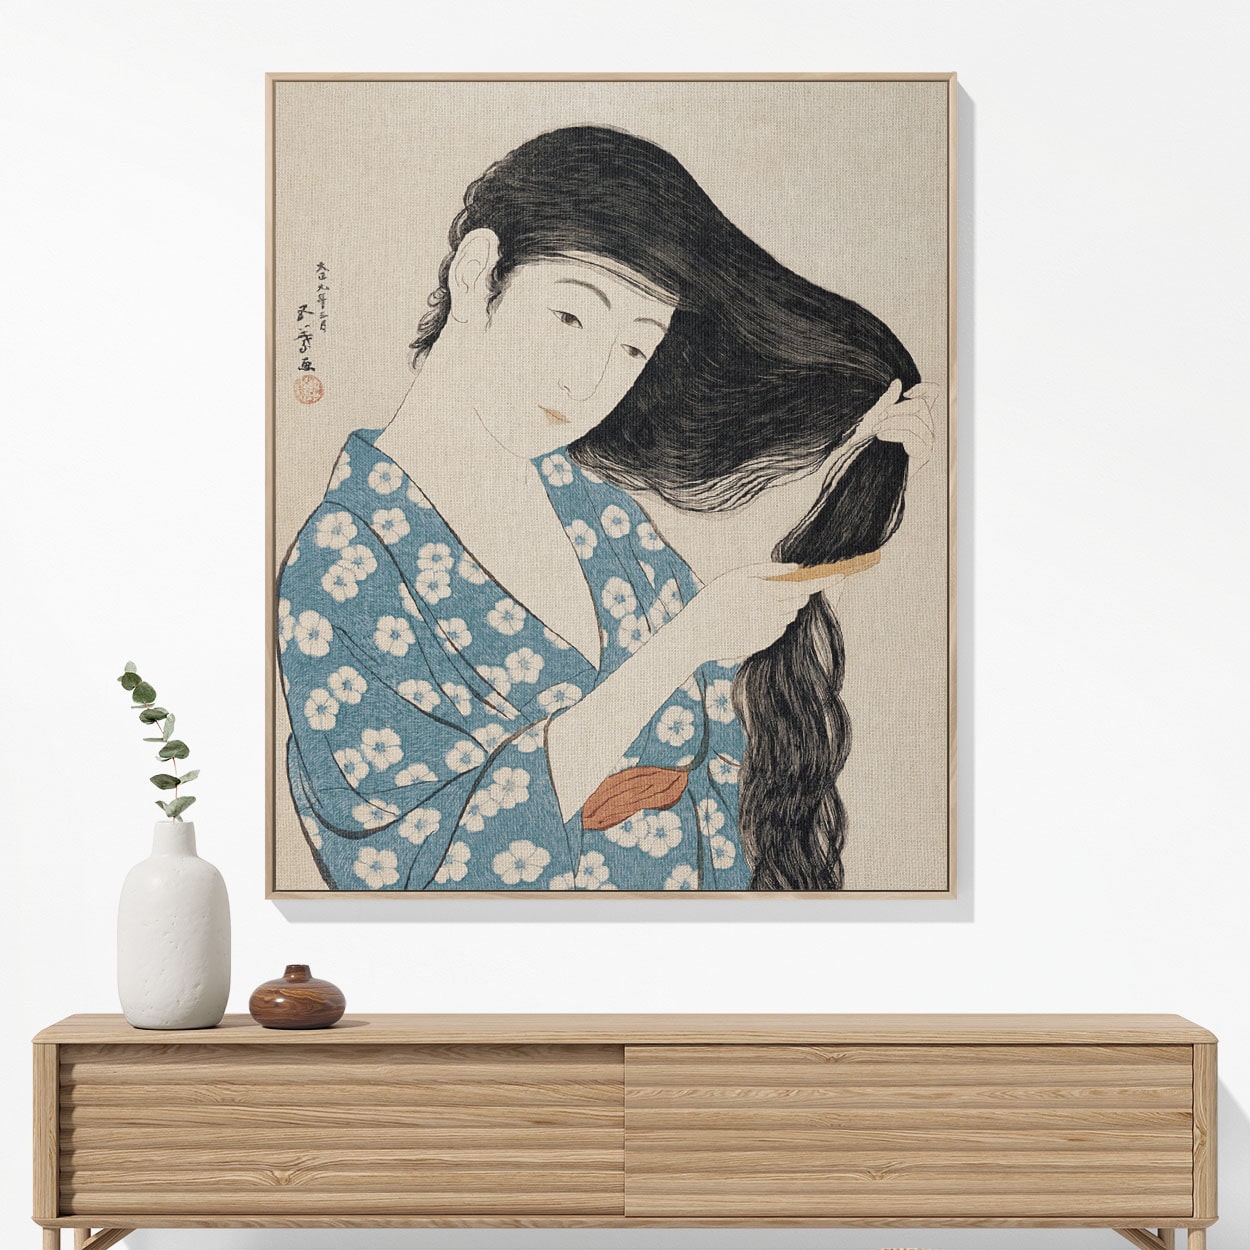 Japanese Woven Blanket Woven Blanket Hanging on a Wall as Framed Wall Art